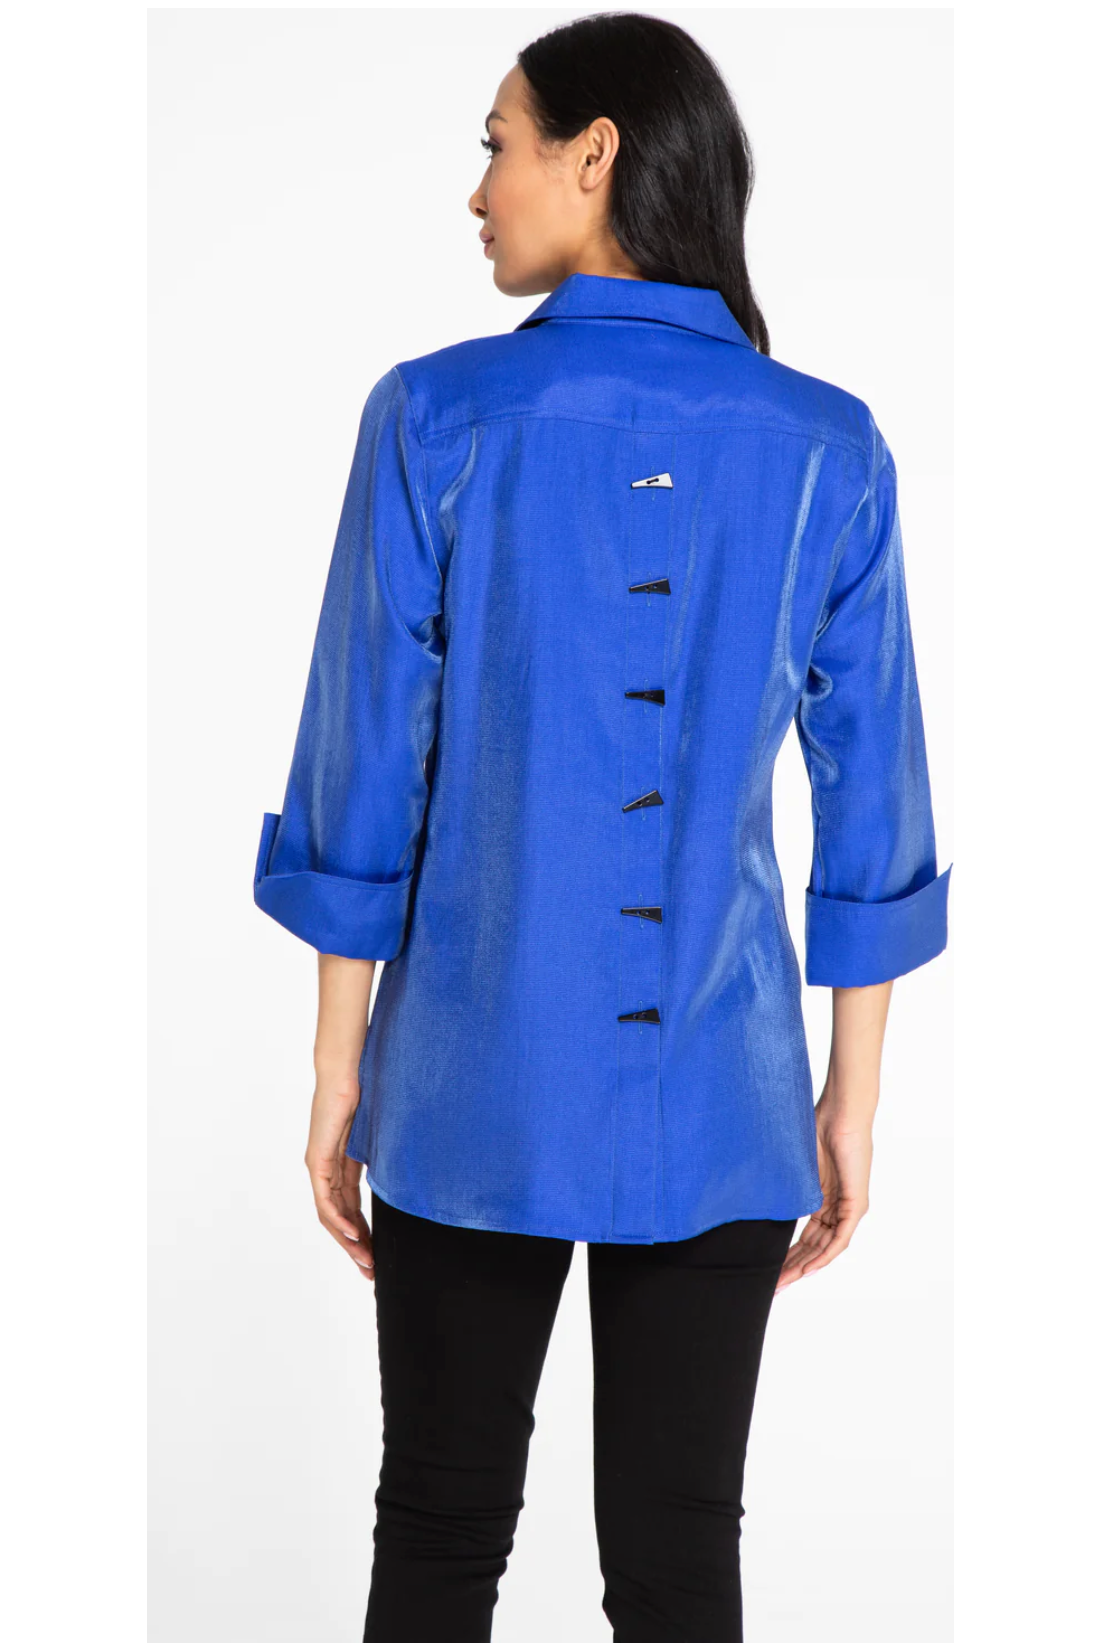 Multiples - Turn-Up Cuff 3/4 Sleeve Button Front Hi-Lo Shirt - Deep Royal Blue - M42116